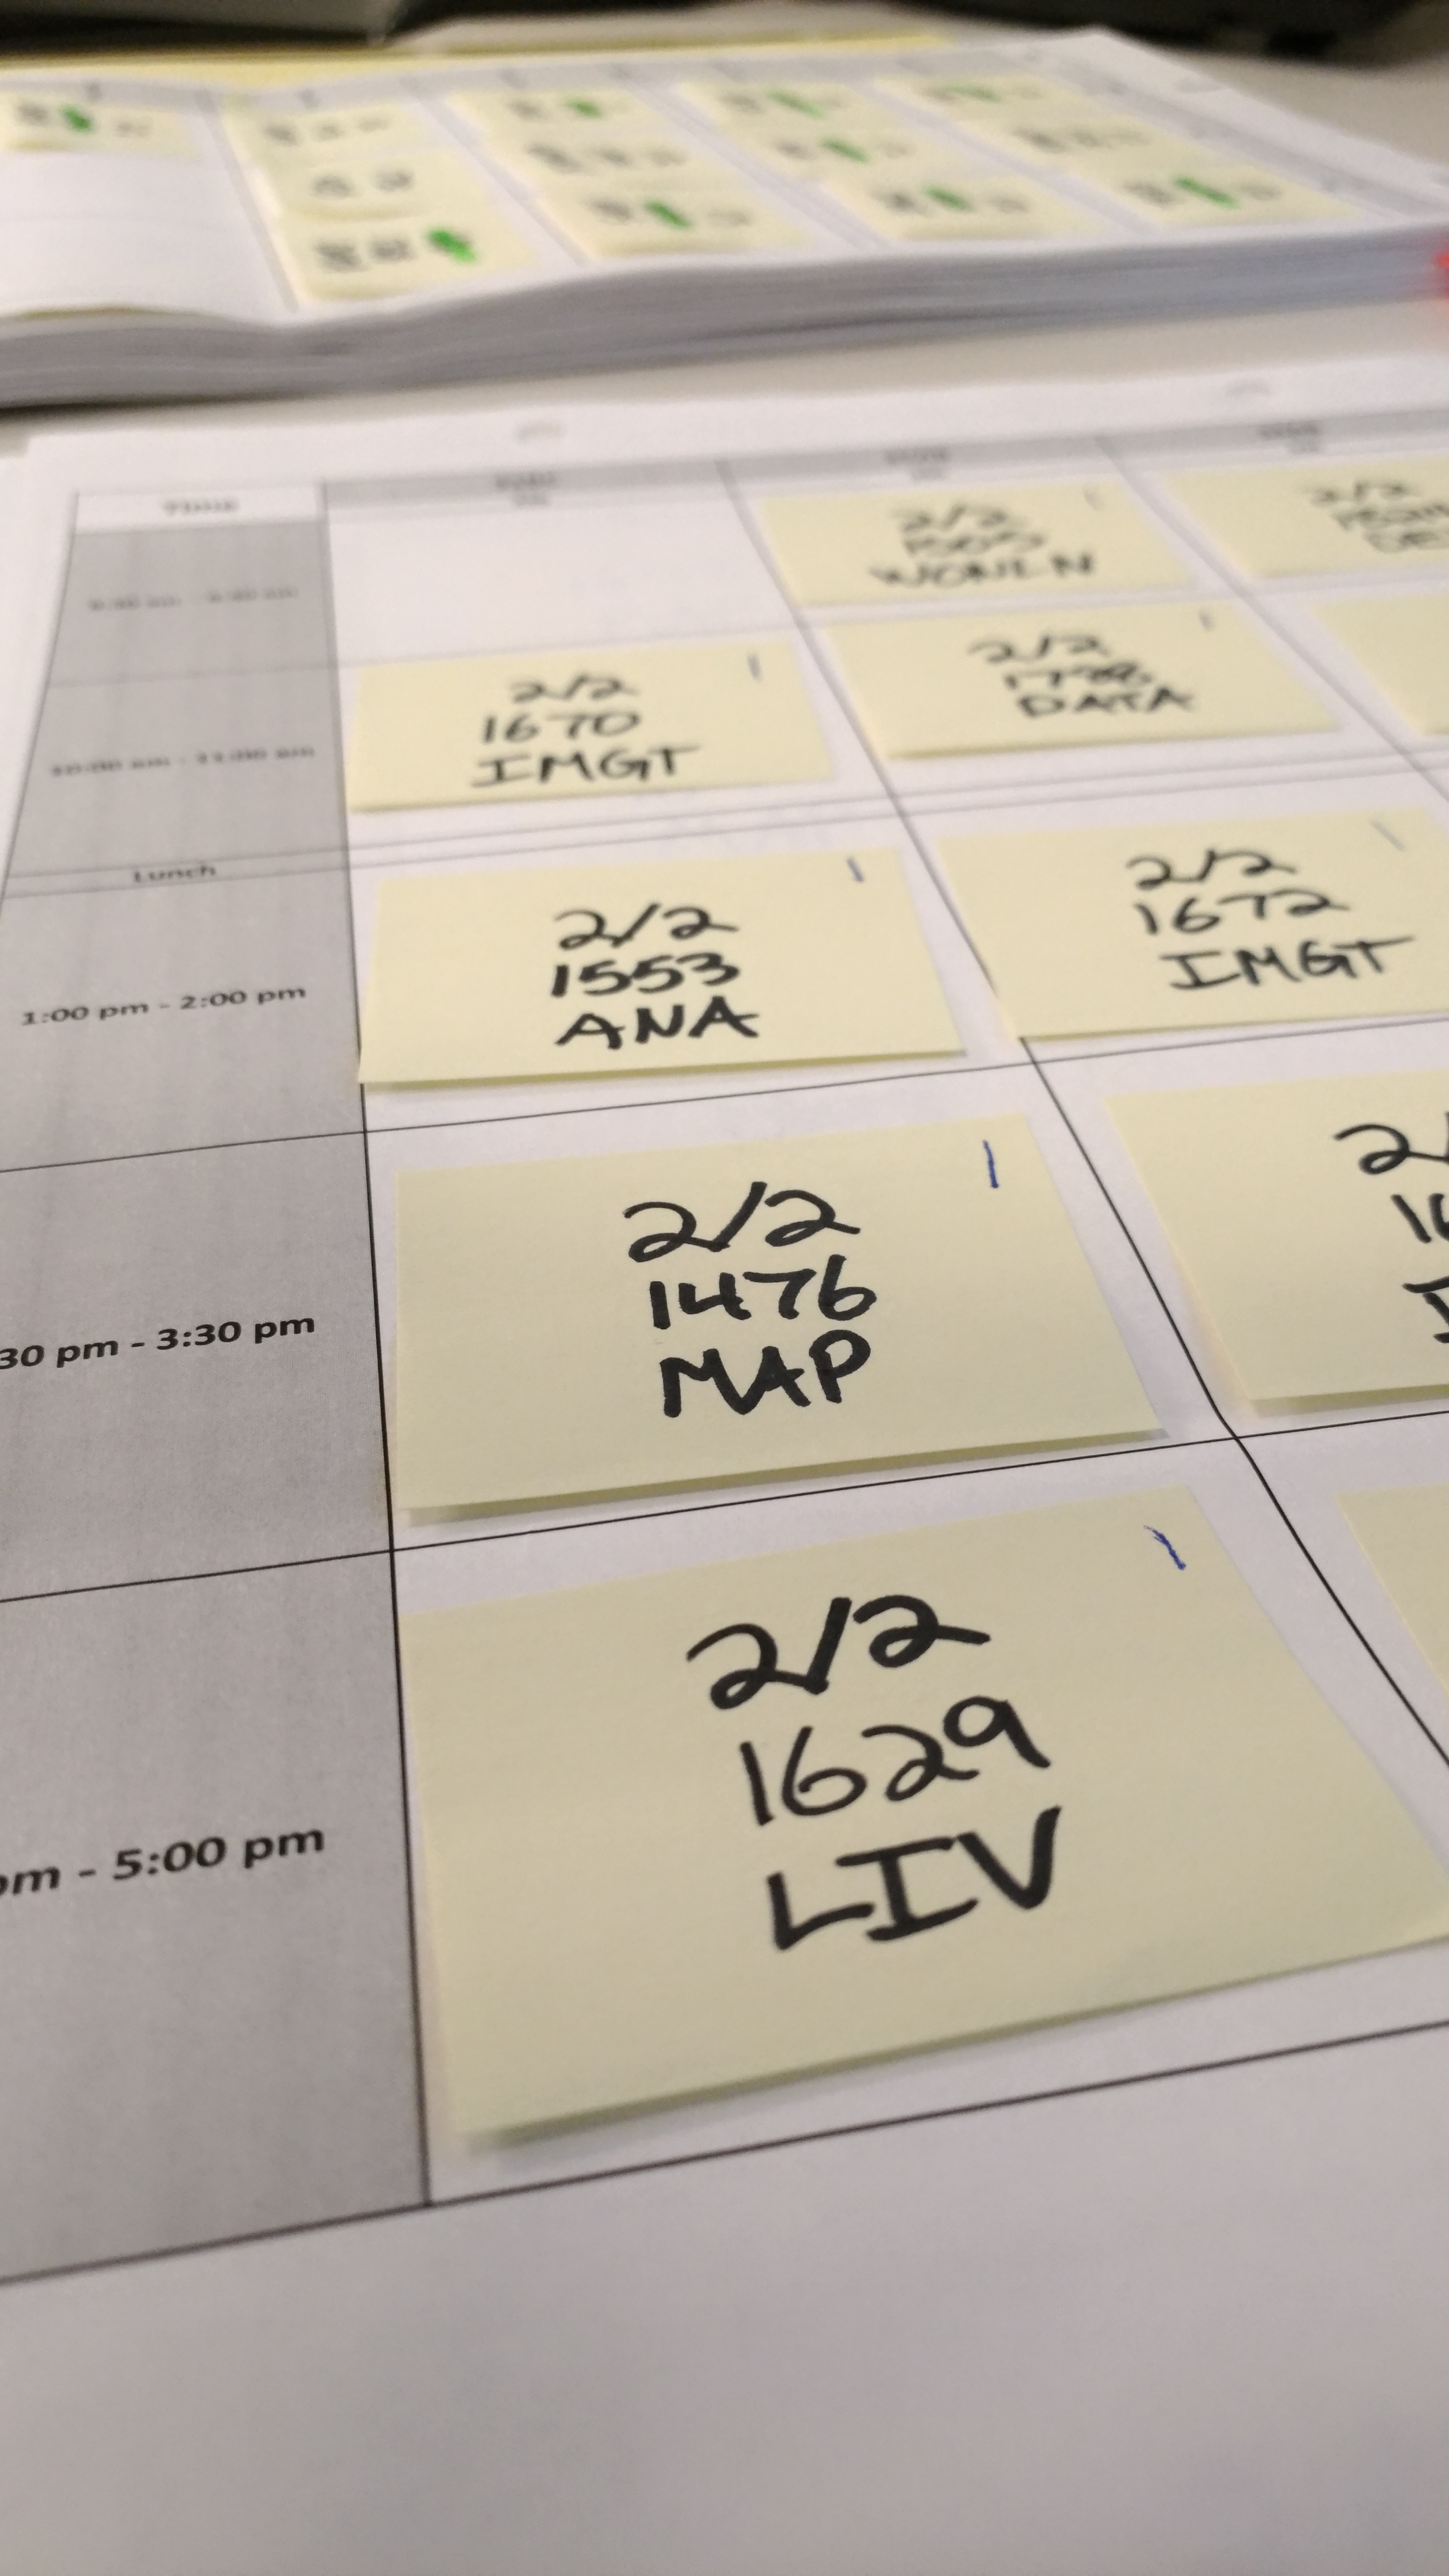 Sessions on sticky notes on a grid of room times